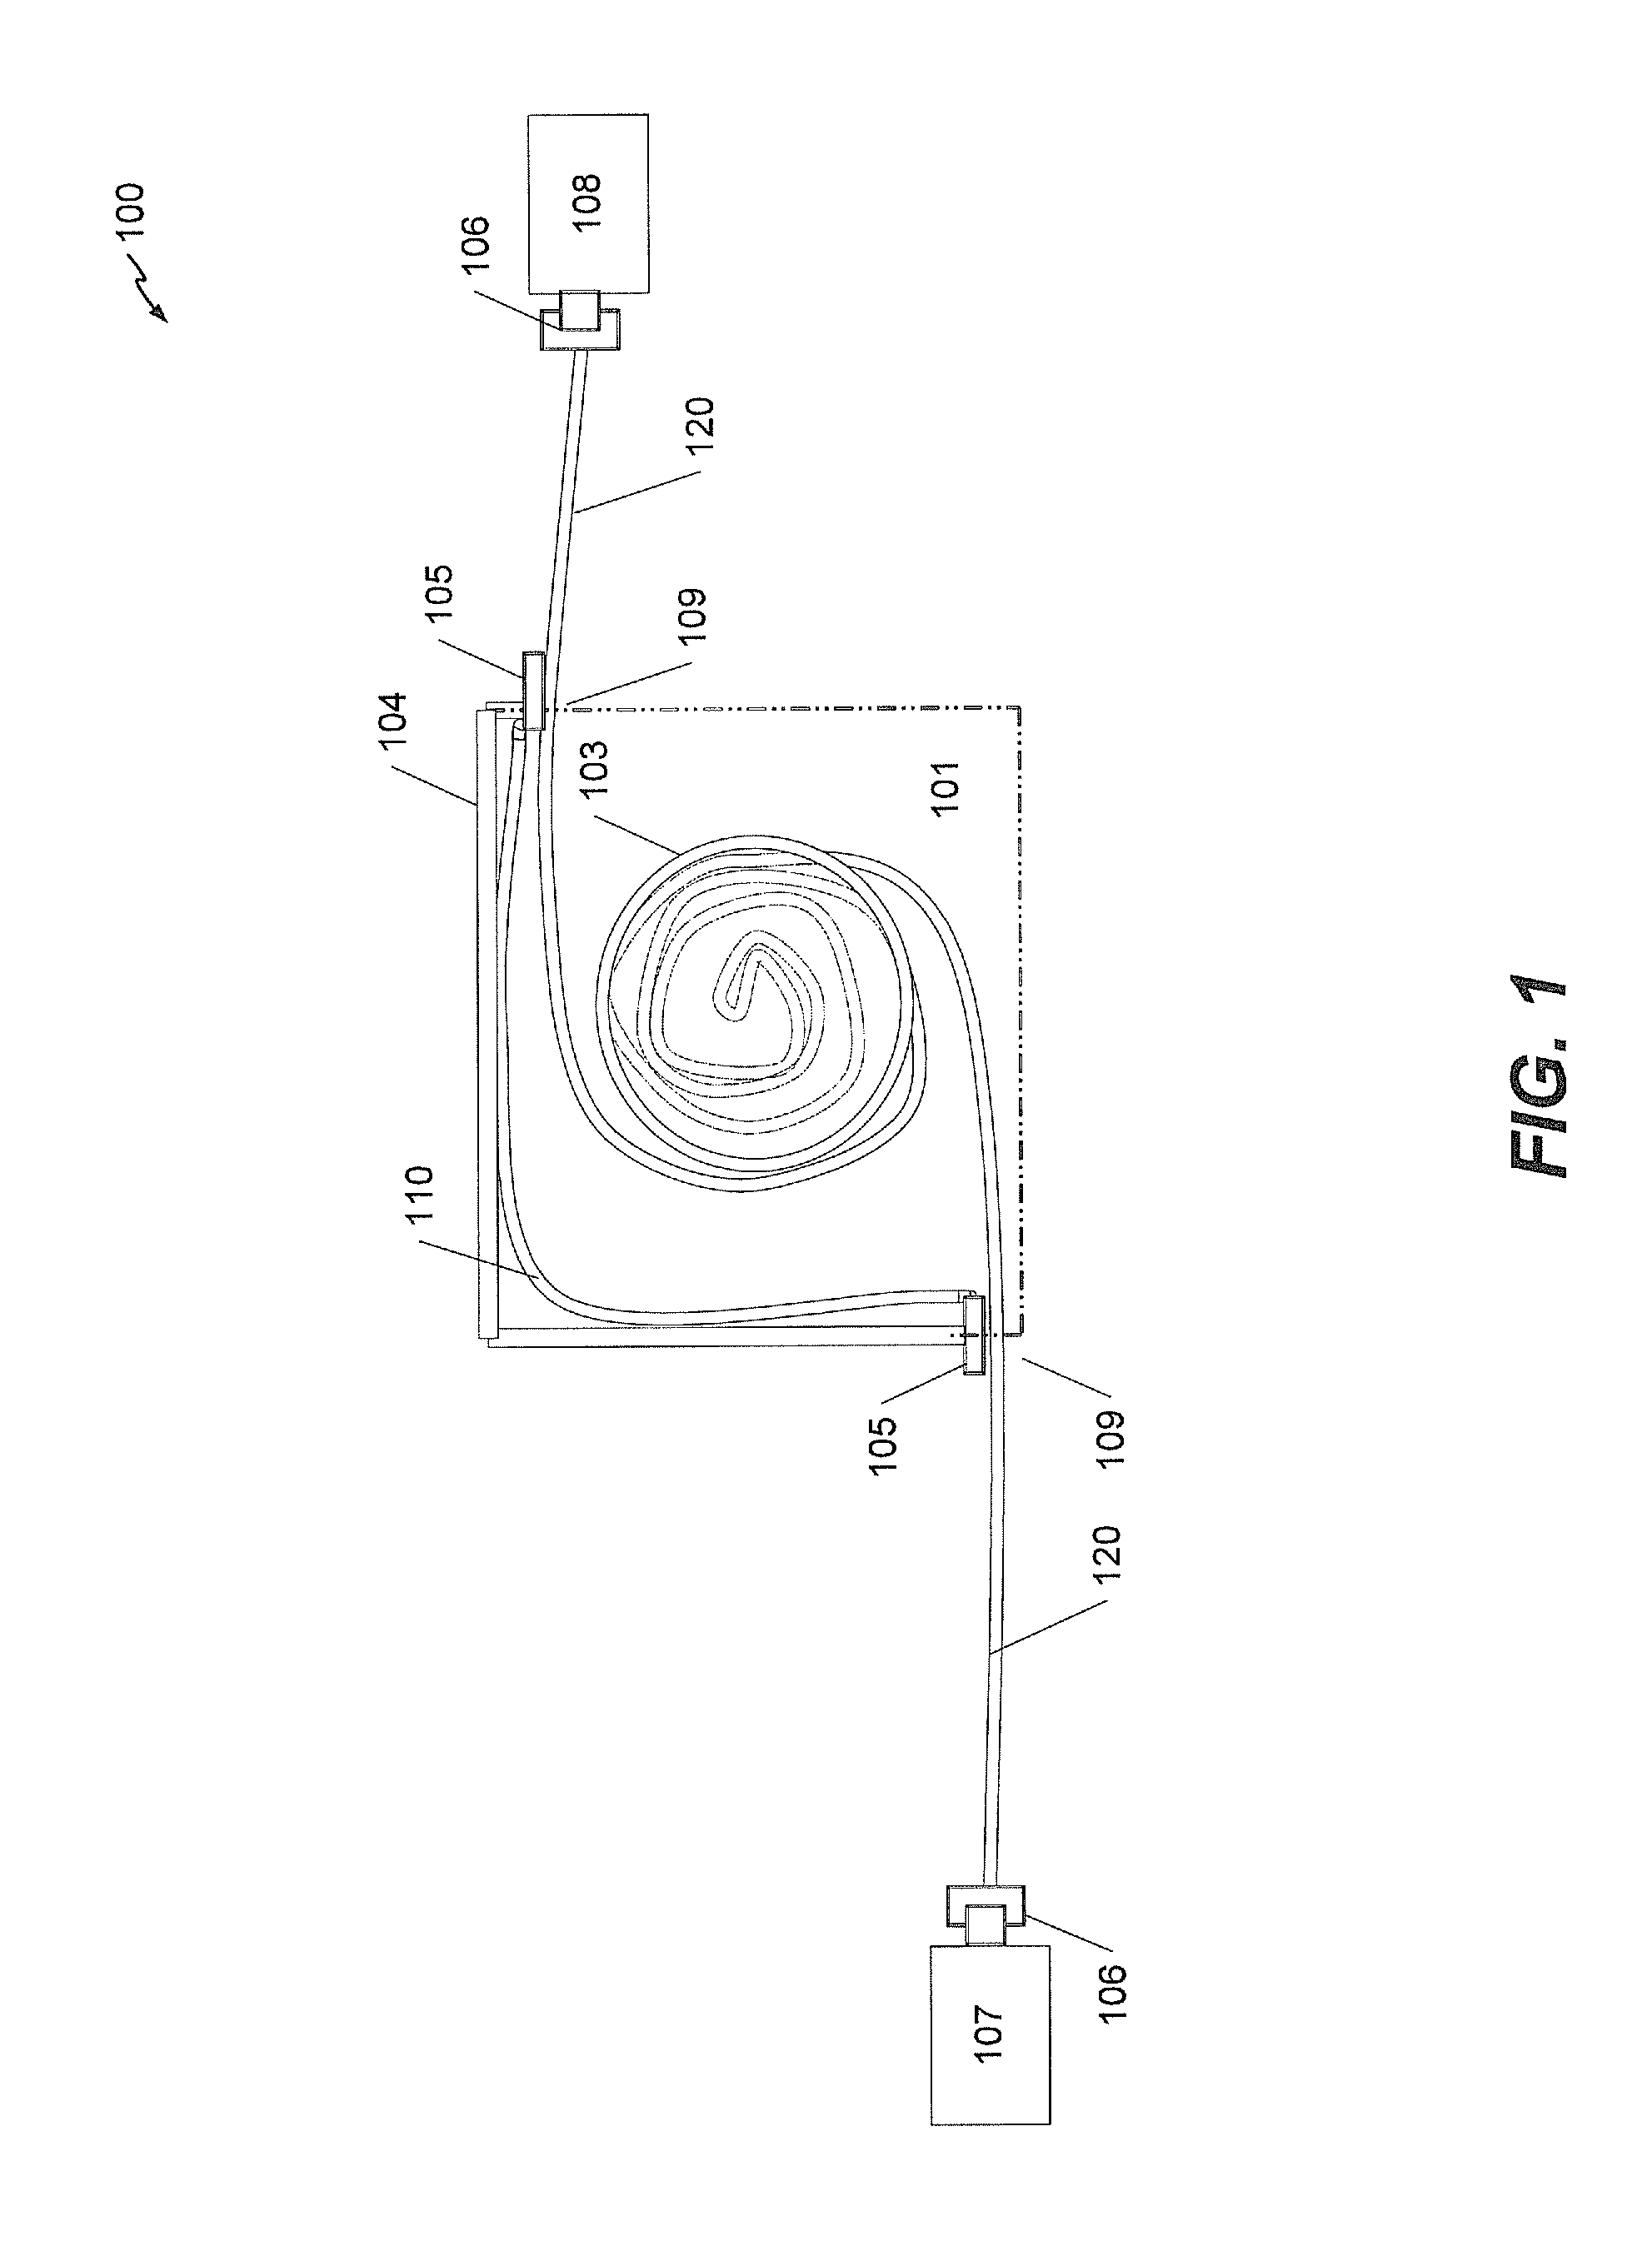 Retractable interconnect device configured to switch between electrical paths